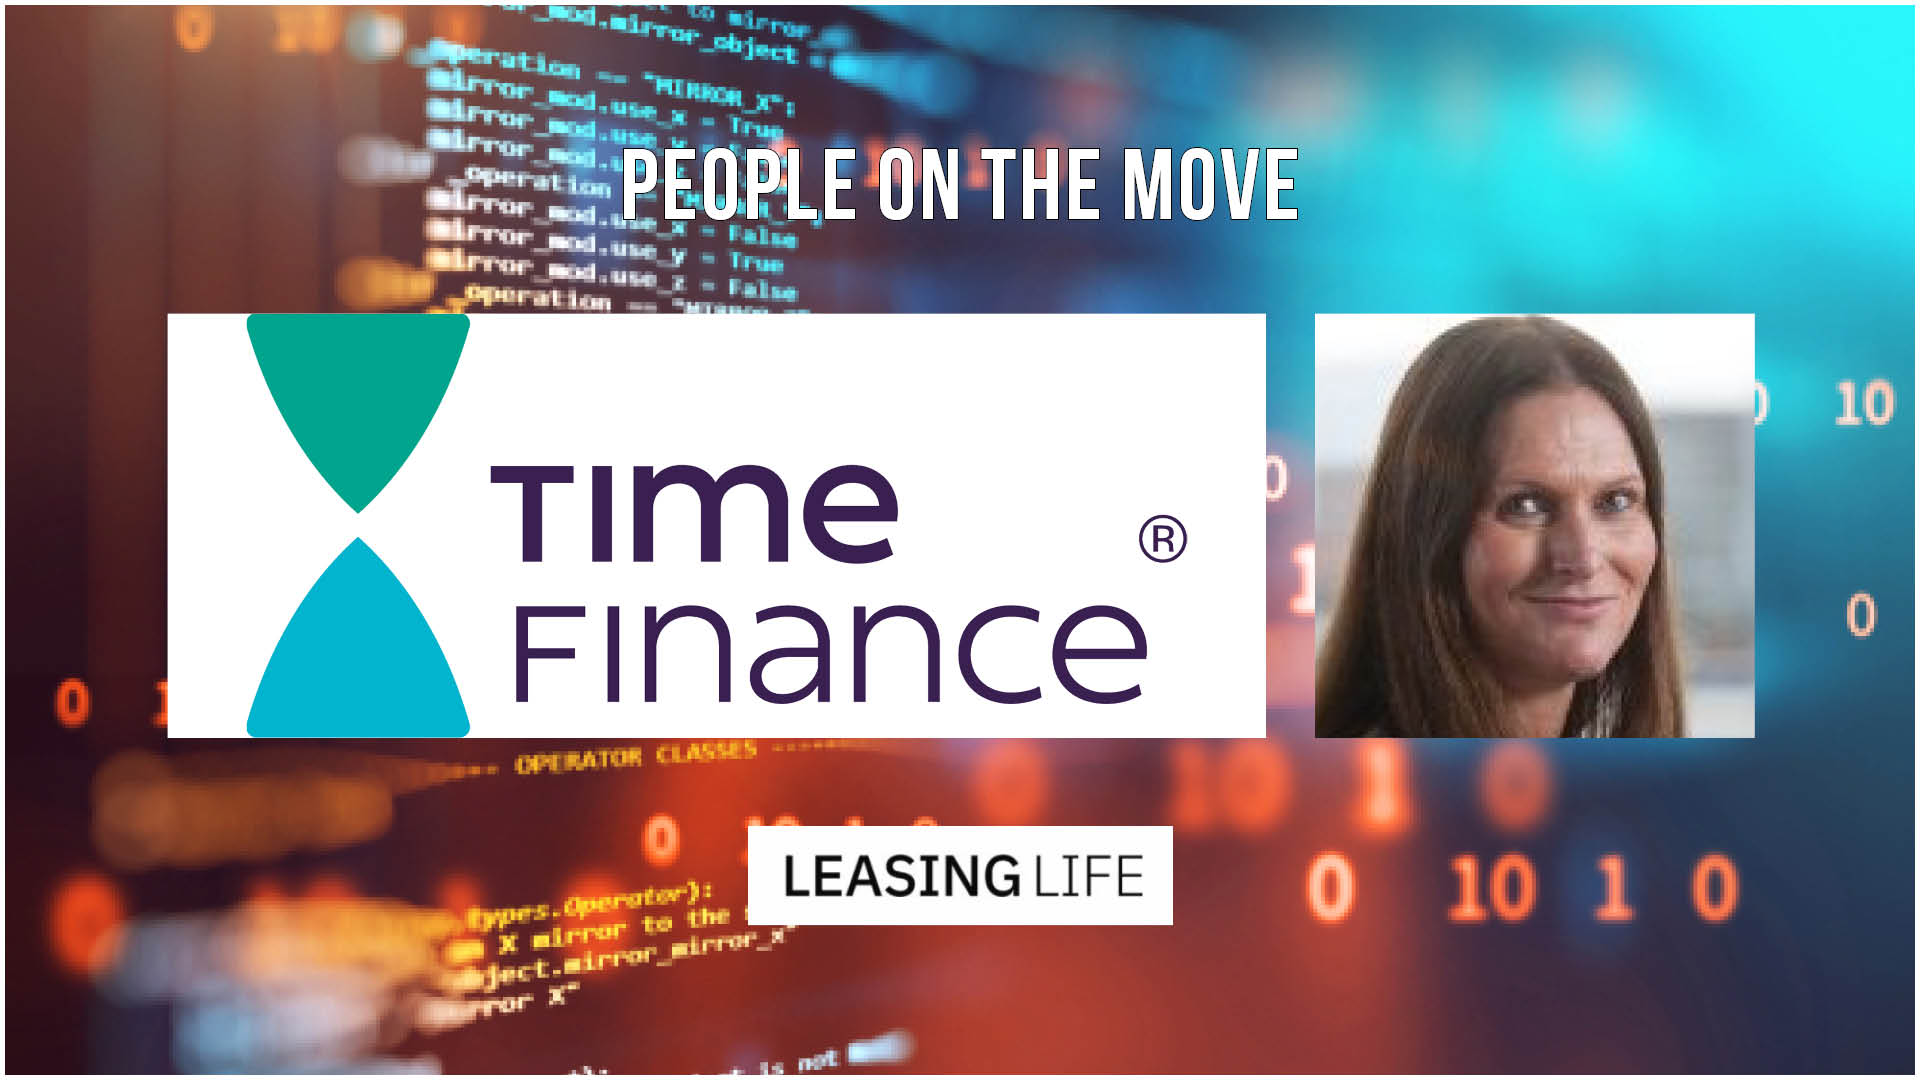 Time Finance appoints Bryden as director of commercial loans & ABL